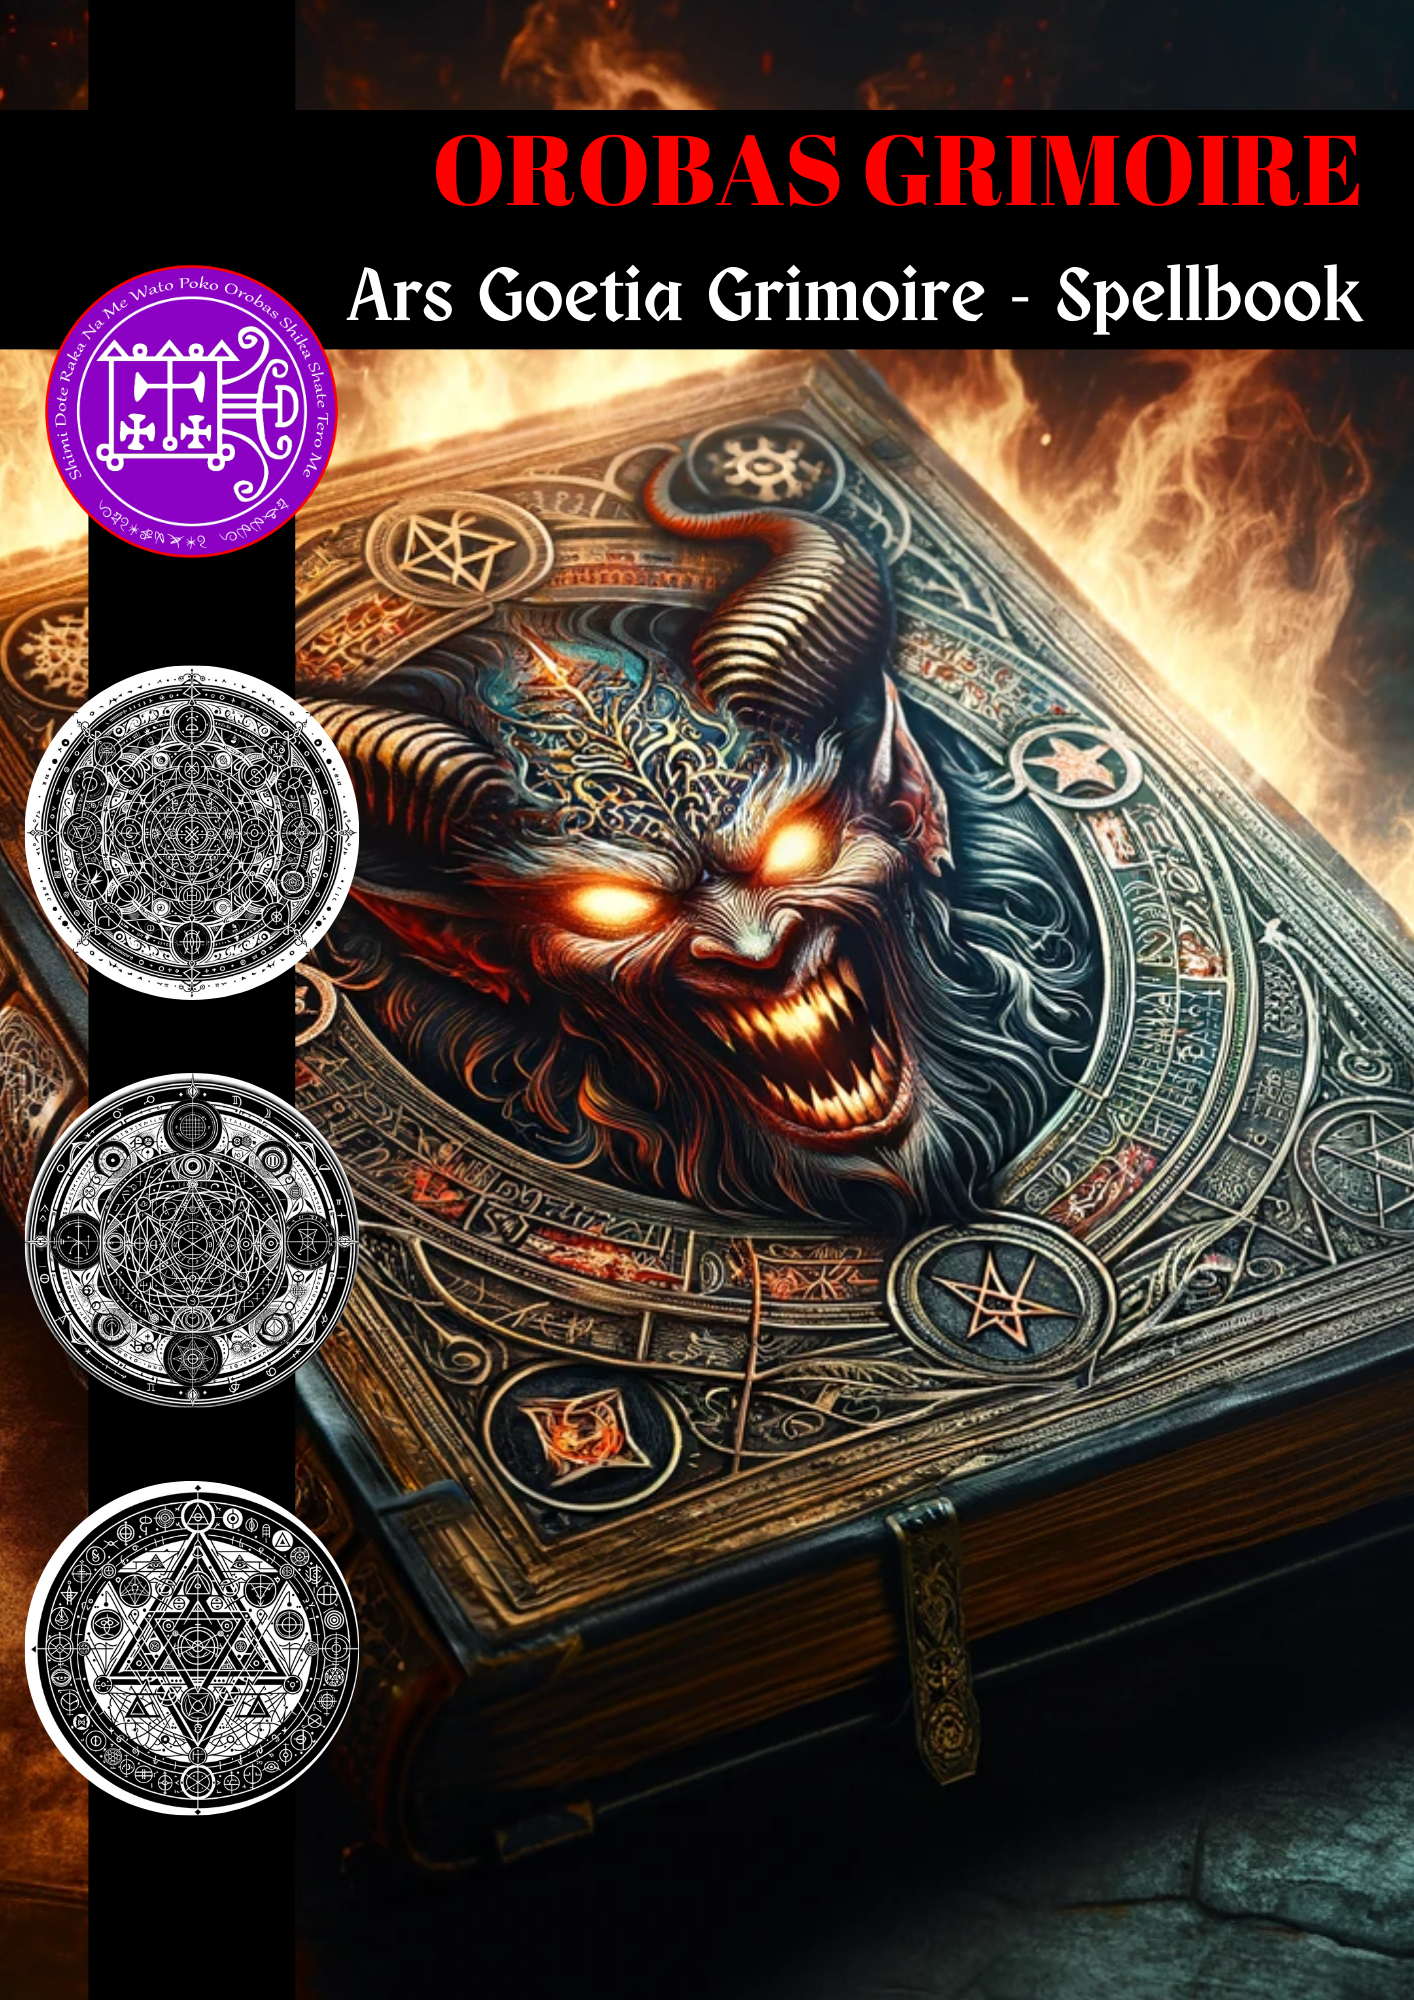 Grimoire of Orobas Spells & Rituals Grimoire to bind or cut emotional attachment - Abraxas Amulets ® Magic ♾️ Talismans ♾️ Initiations